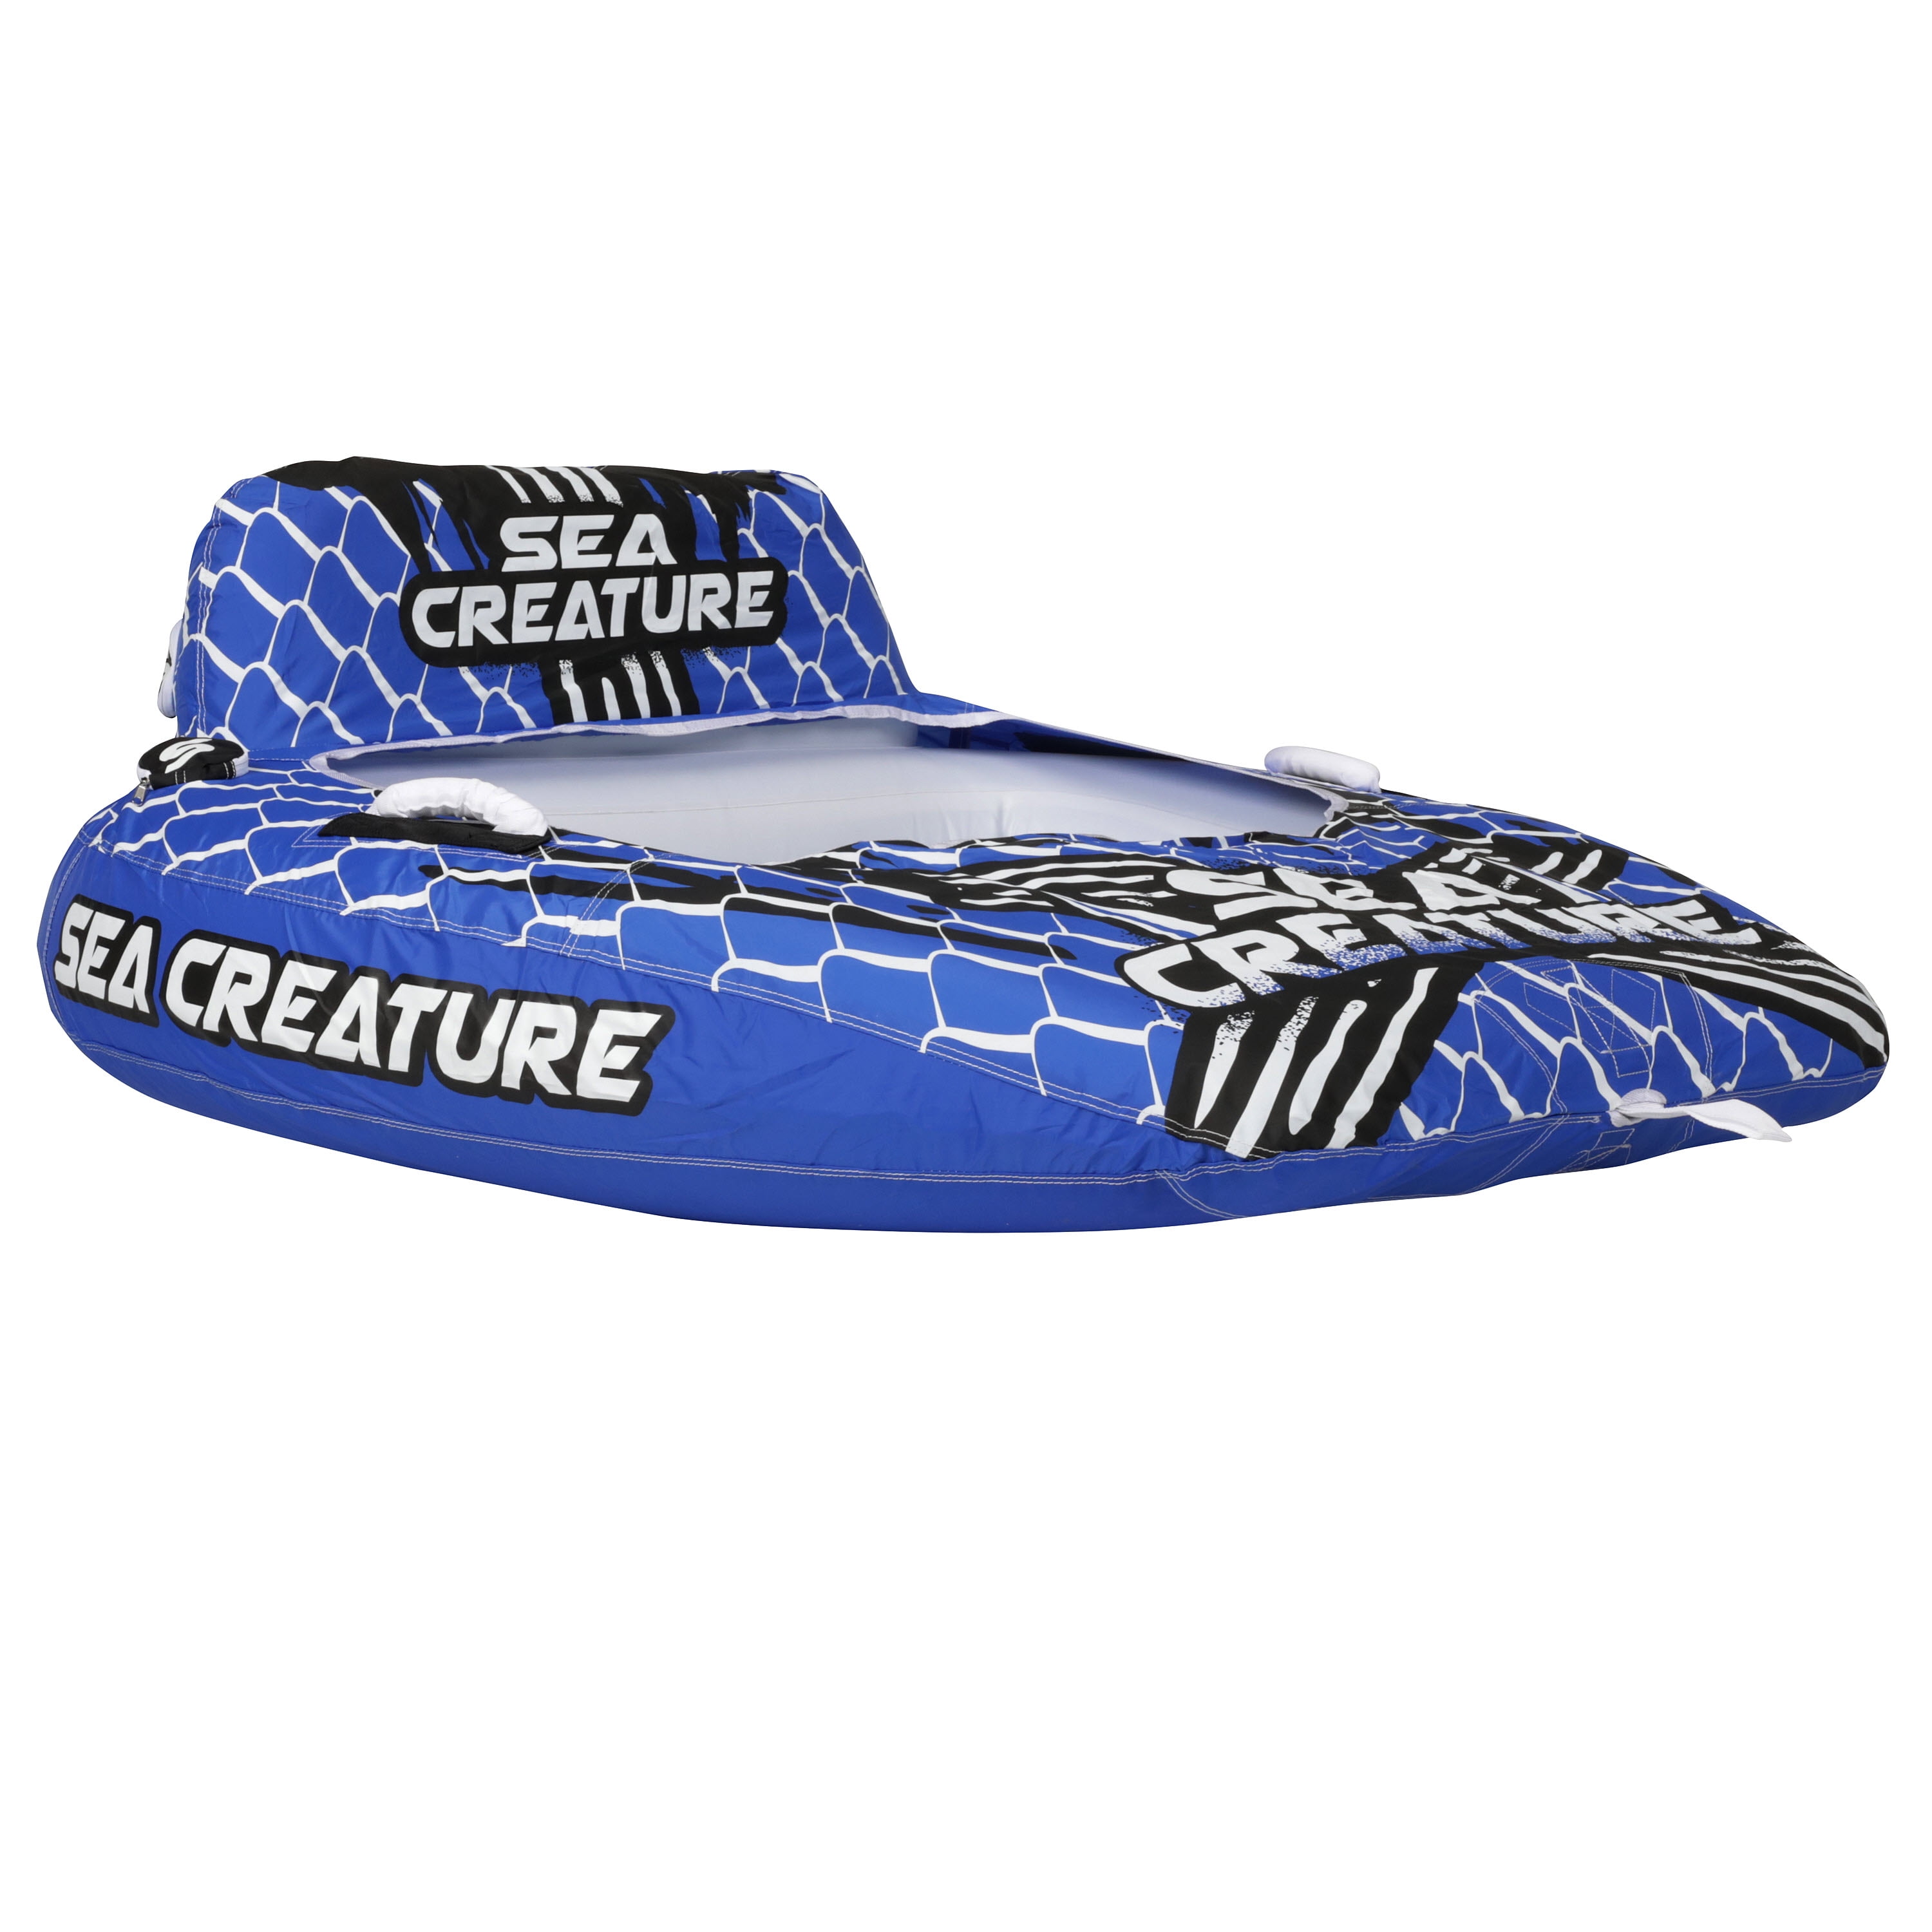 Seachoice Sea-Creature Towable Tube, Open Top Boat Tube w/ Backrests, 2 Person, 60 In. X 58 In. - 1